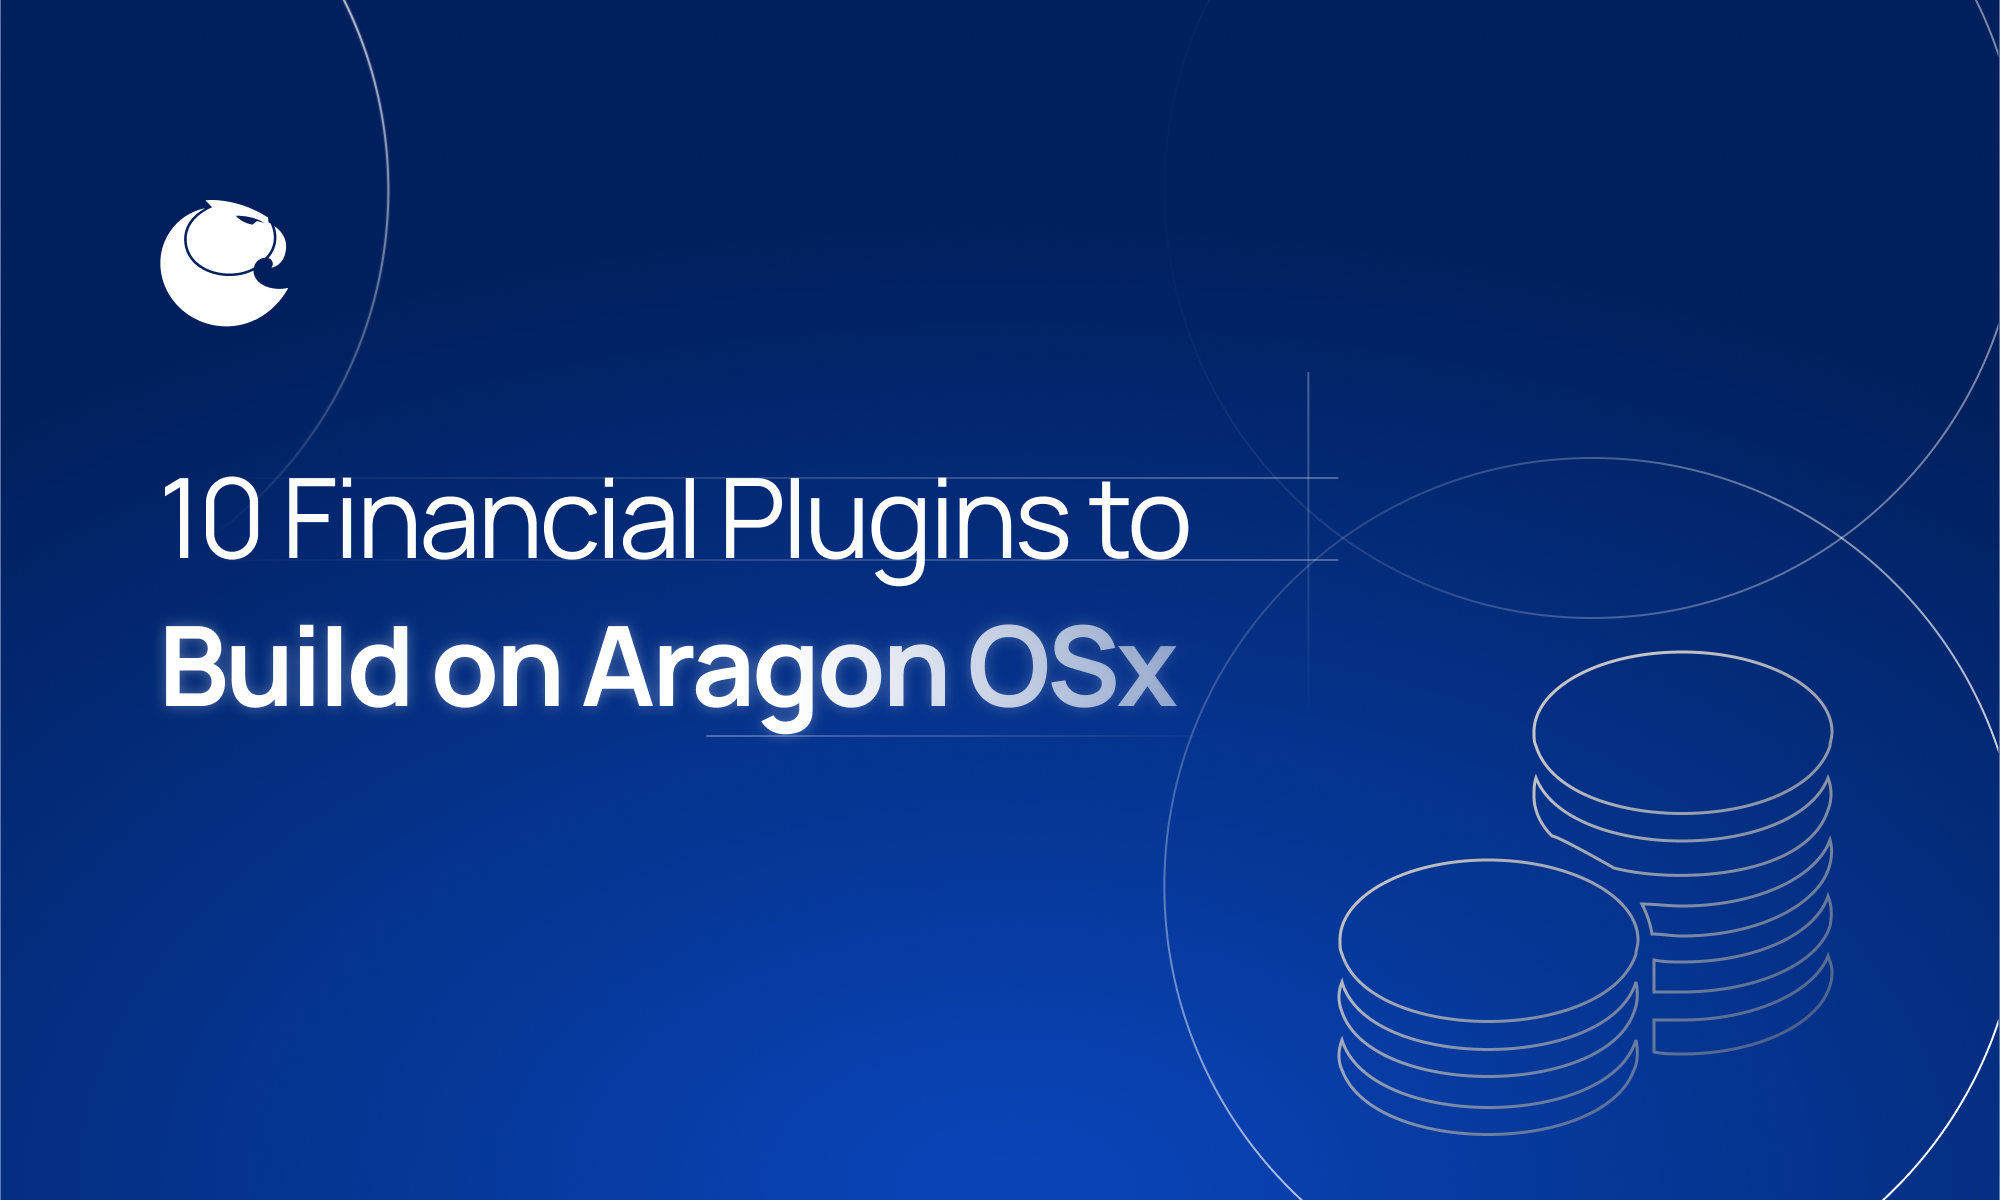 10-financial-plugins-to-build-on-aragon-osx